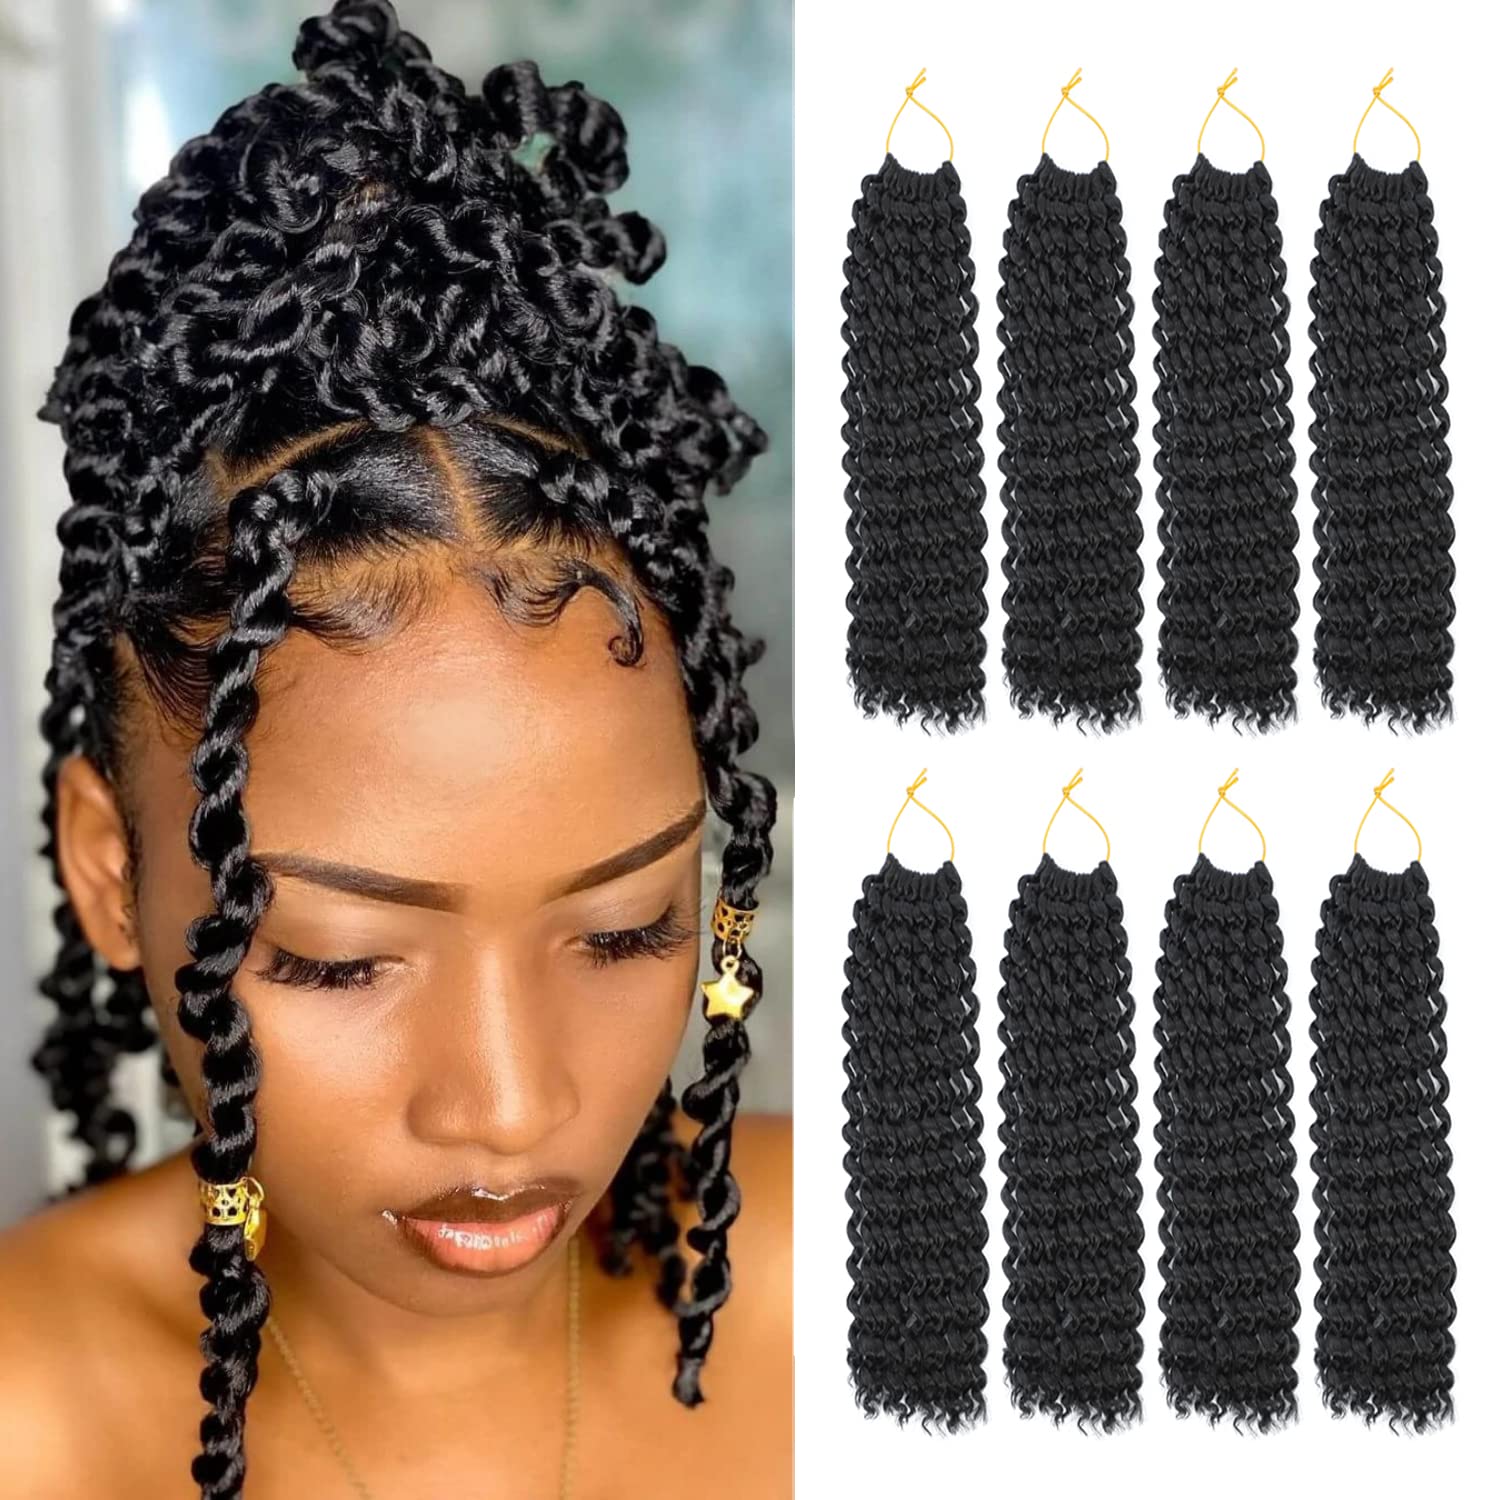 2 Packs Passion Twist Crochet Hair Bob Passion Twist Hair For Butterfly ...